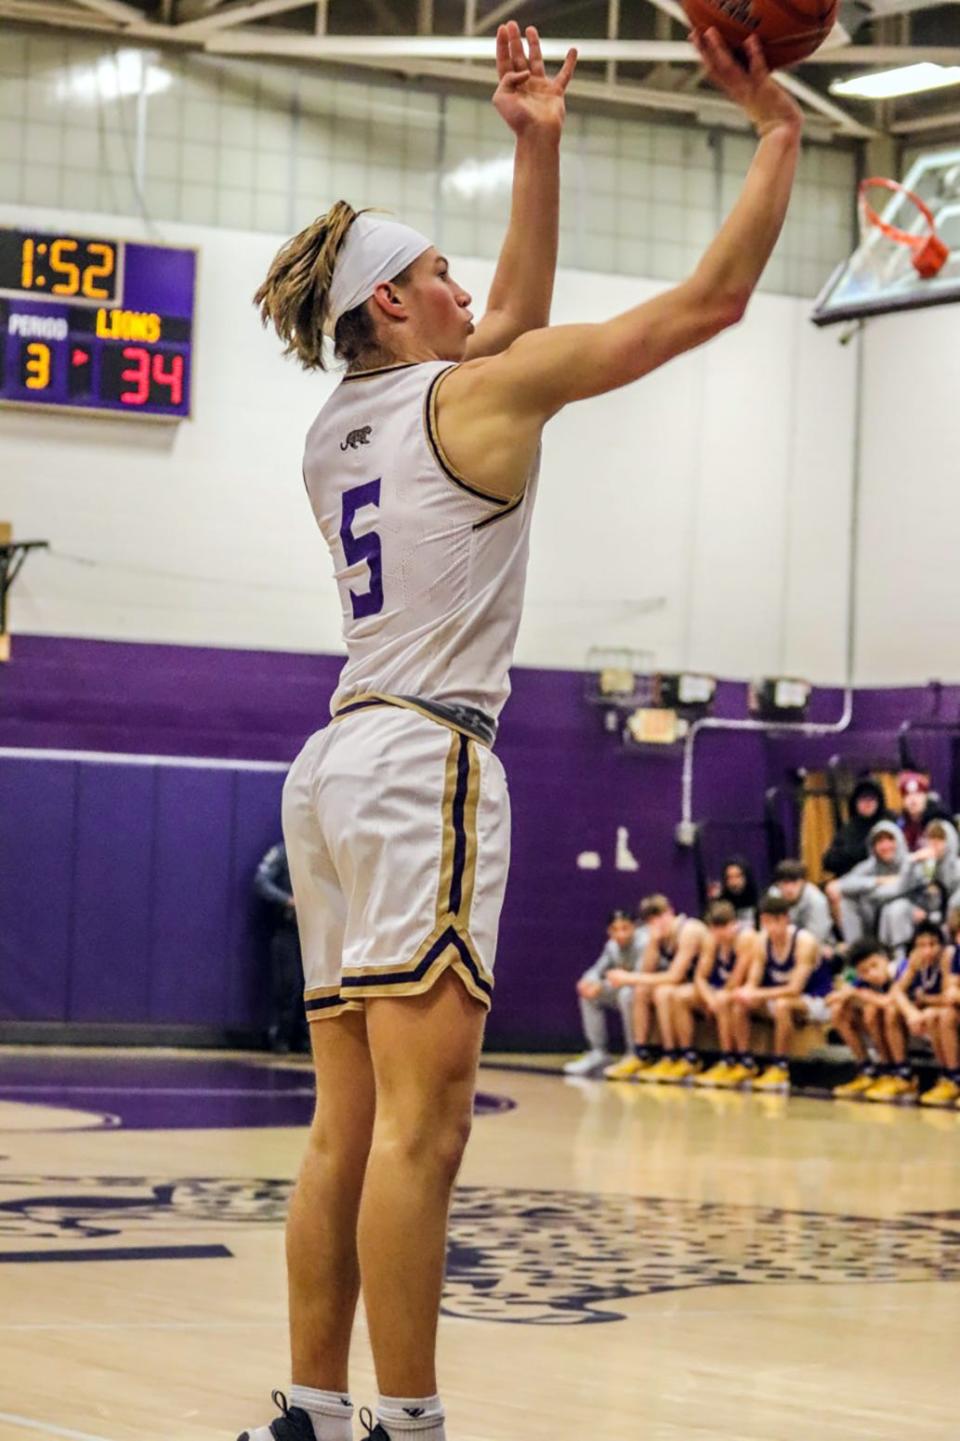 Smithsburg's Sam Bono had a team-high 12 points and added five rebounds in a 48-38 loss to Walkersville on Jan. 6, 2023.